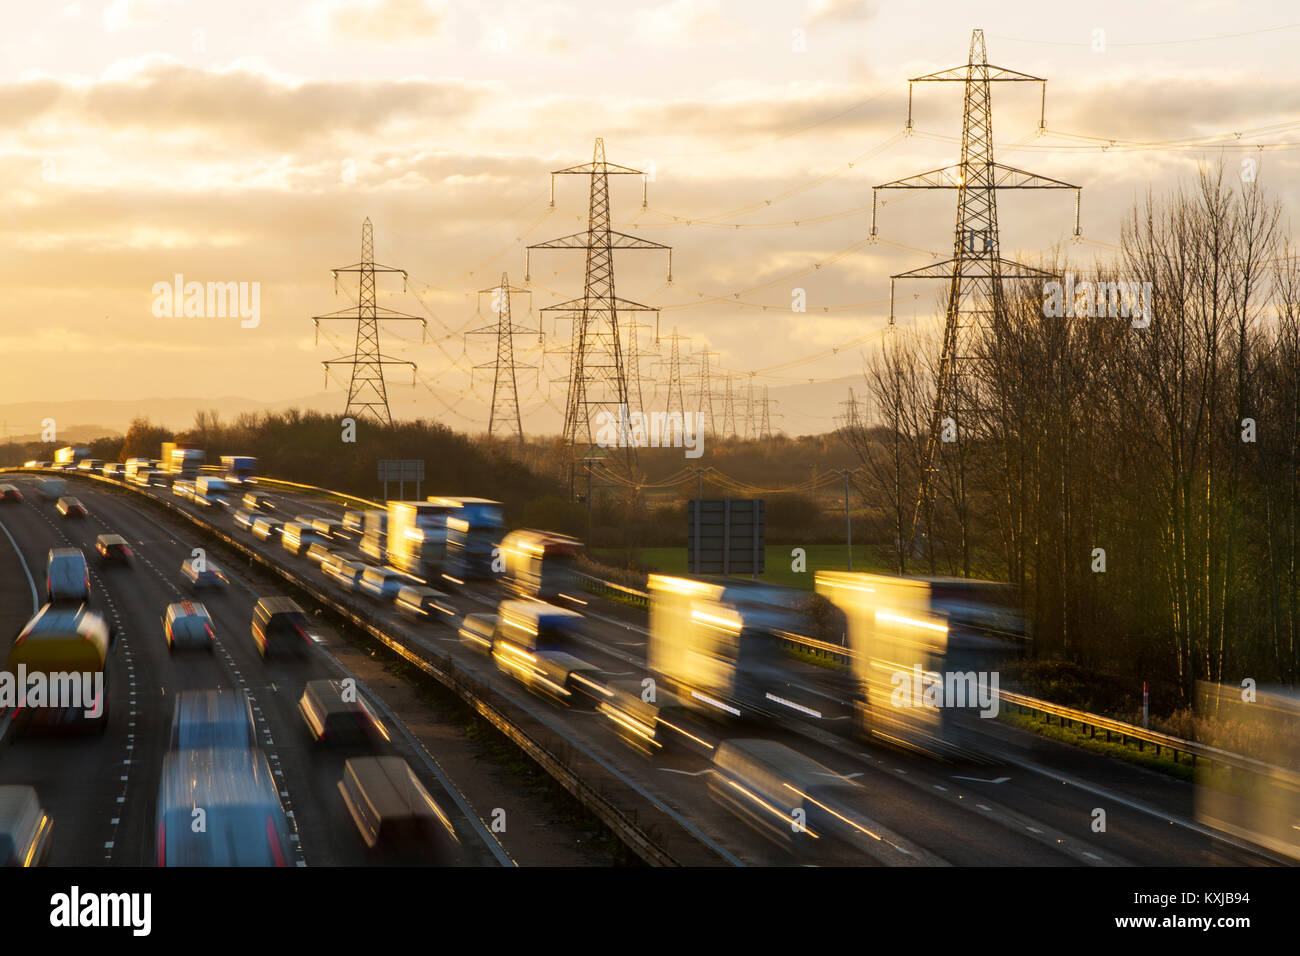 Rushhour on the M56 motorway near Helsby, Cheshire, UK at dusk. Stock Photo